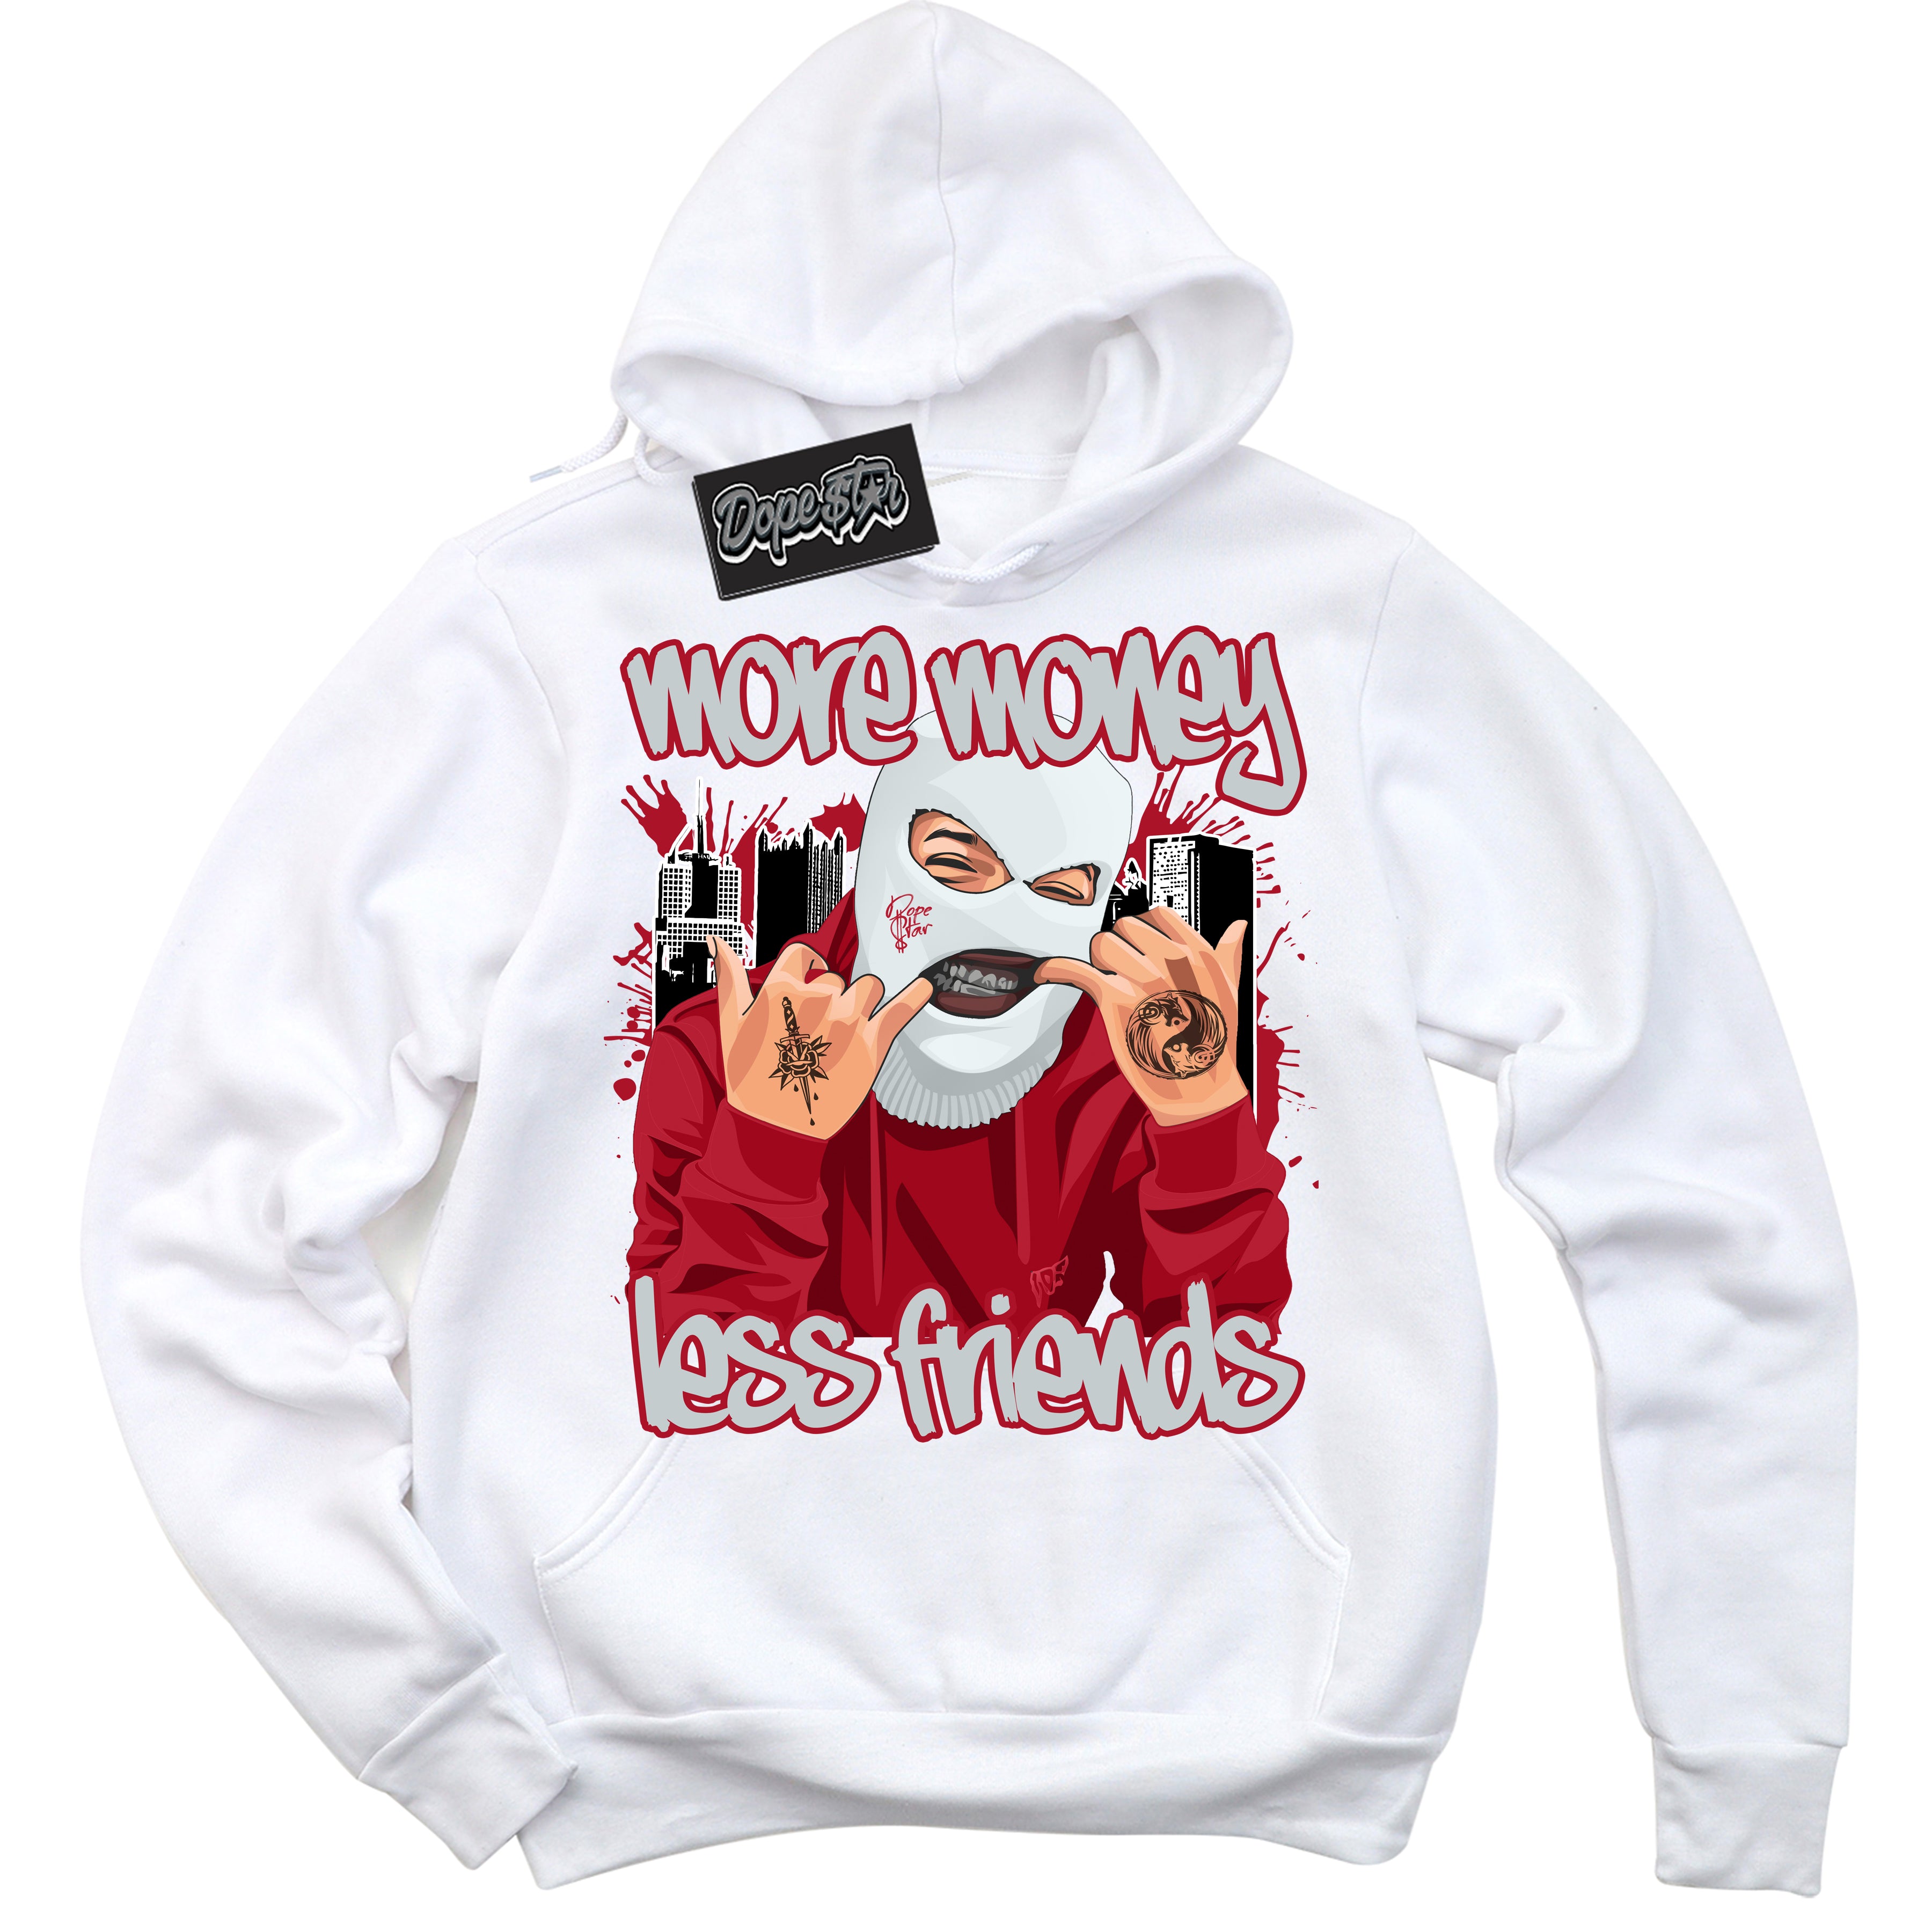 Cool White Hoodie with “ More Money Less Friends ”  design that Perfectly Matches  Reverse Ultraman Sneakers.